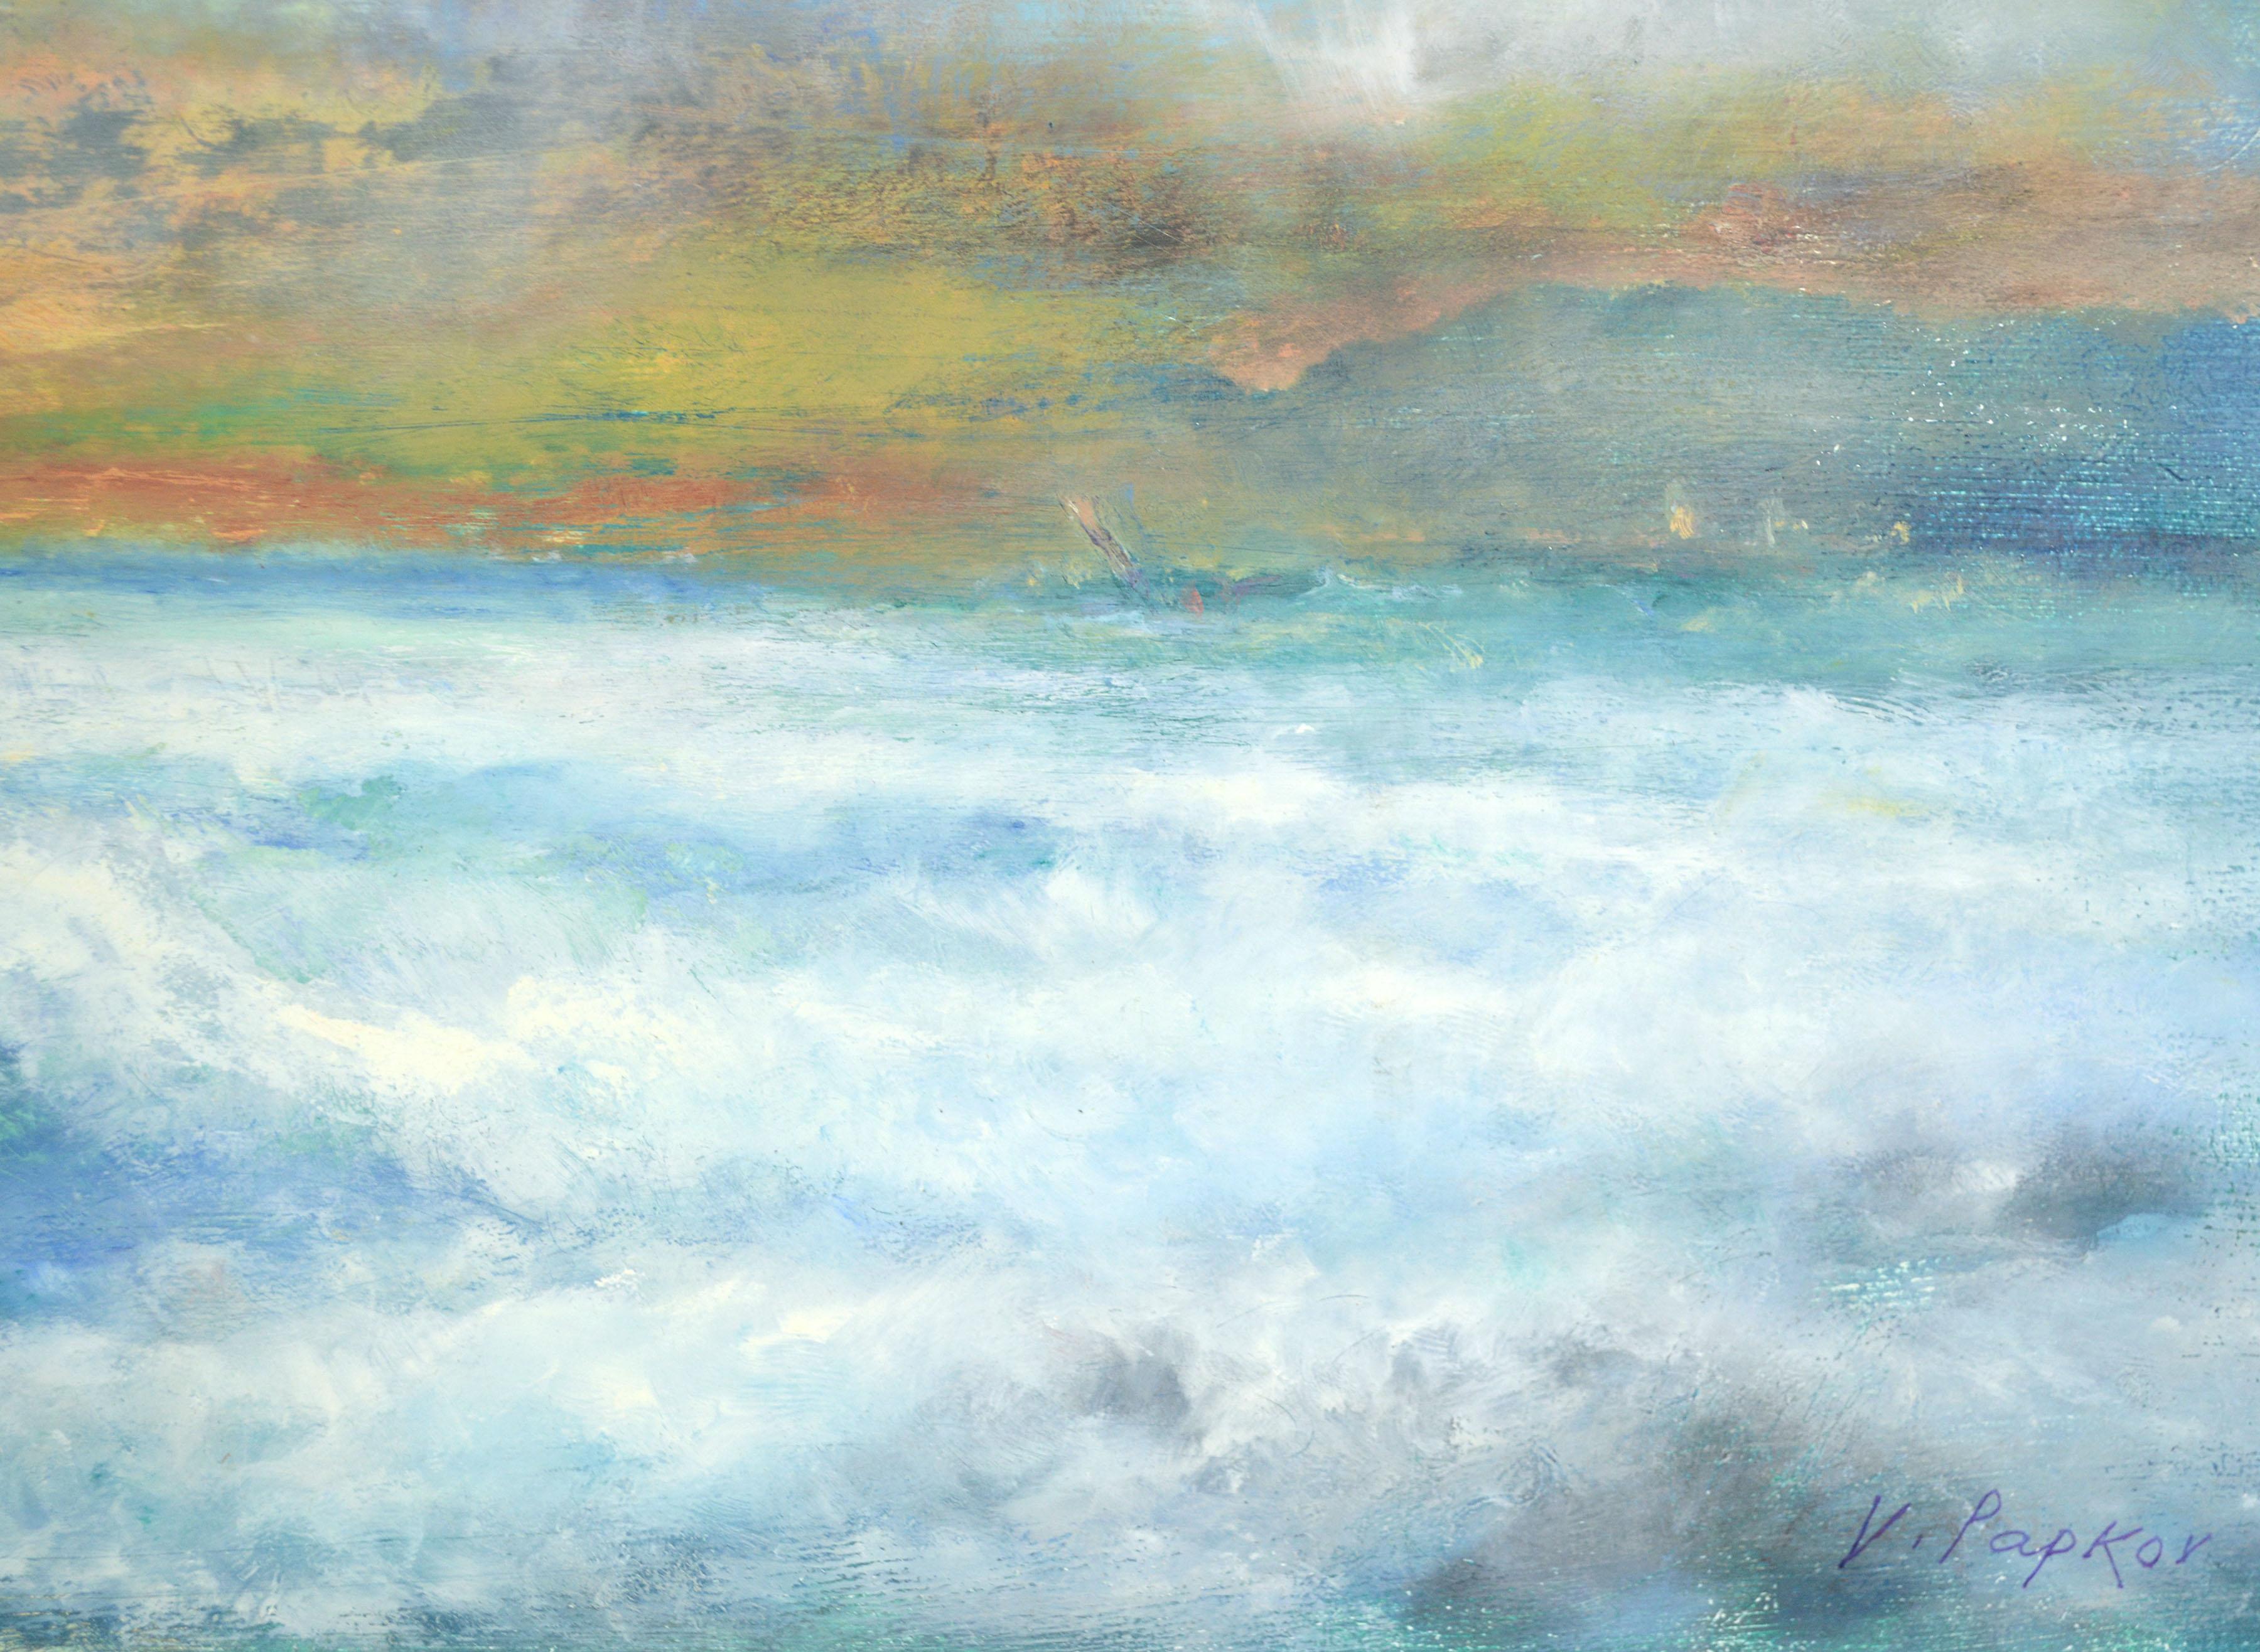 Cyan & Orange Seascape at Sunset  - Abstract Impressionist Painting by Vasil Papkov